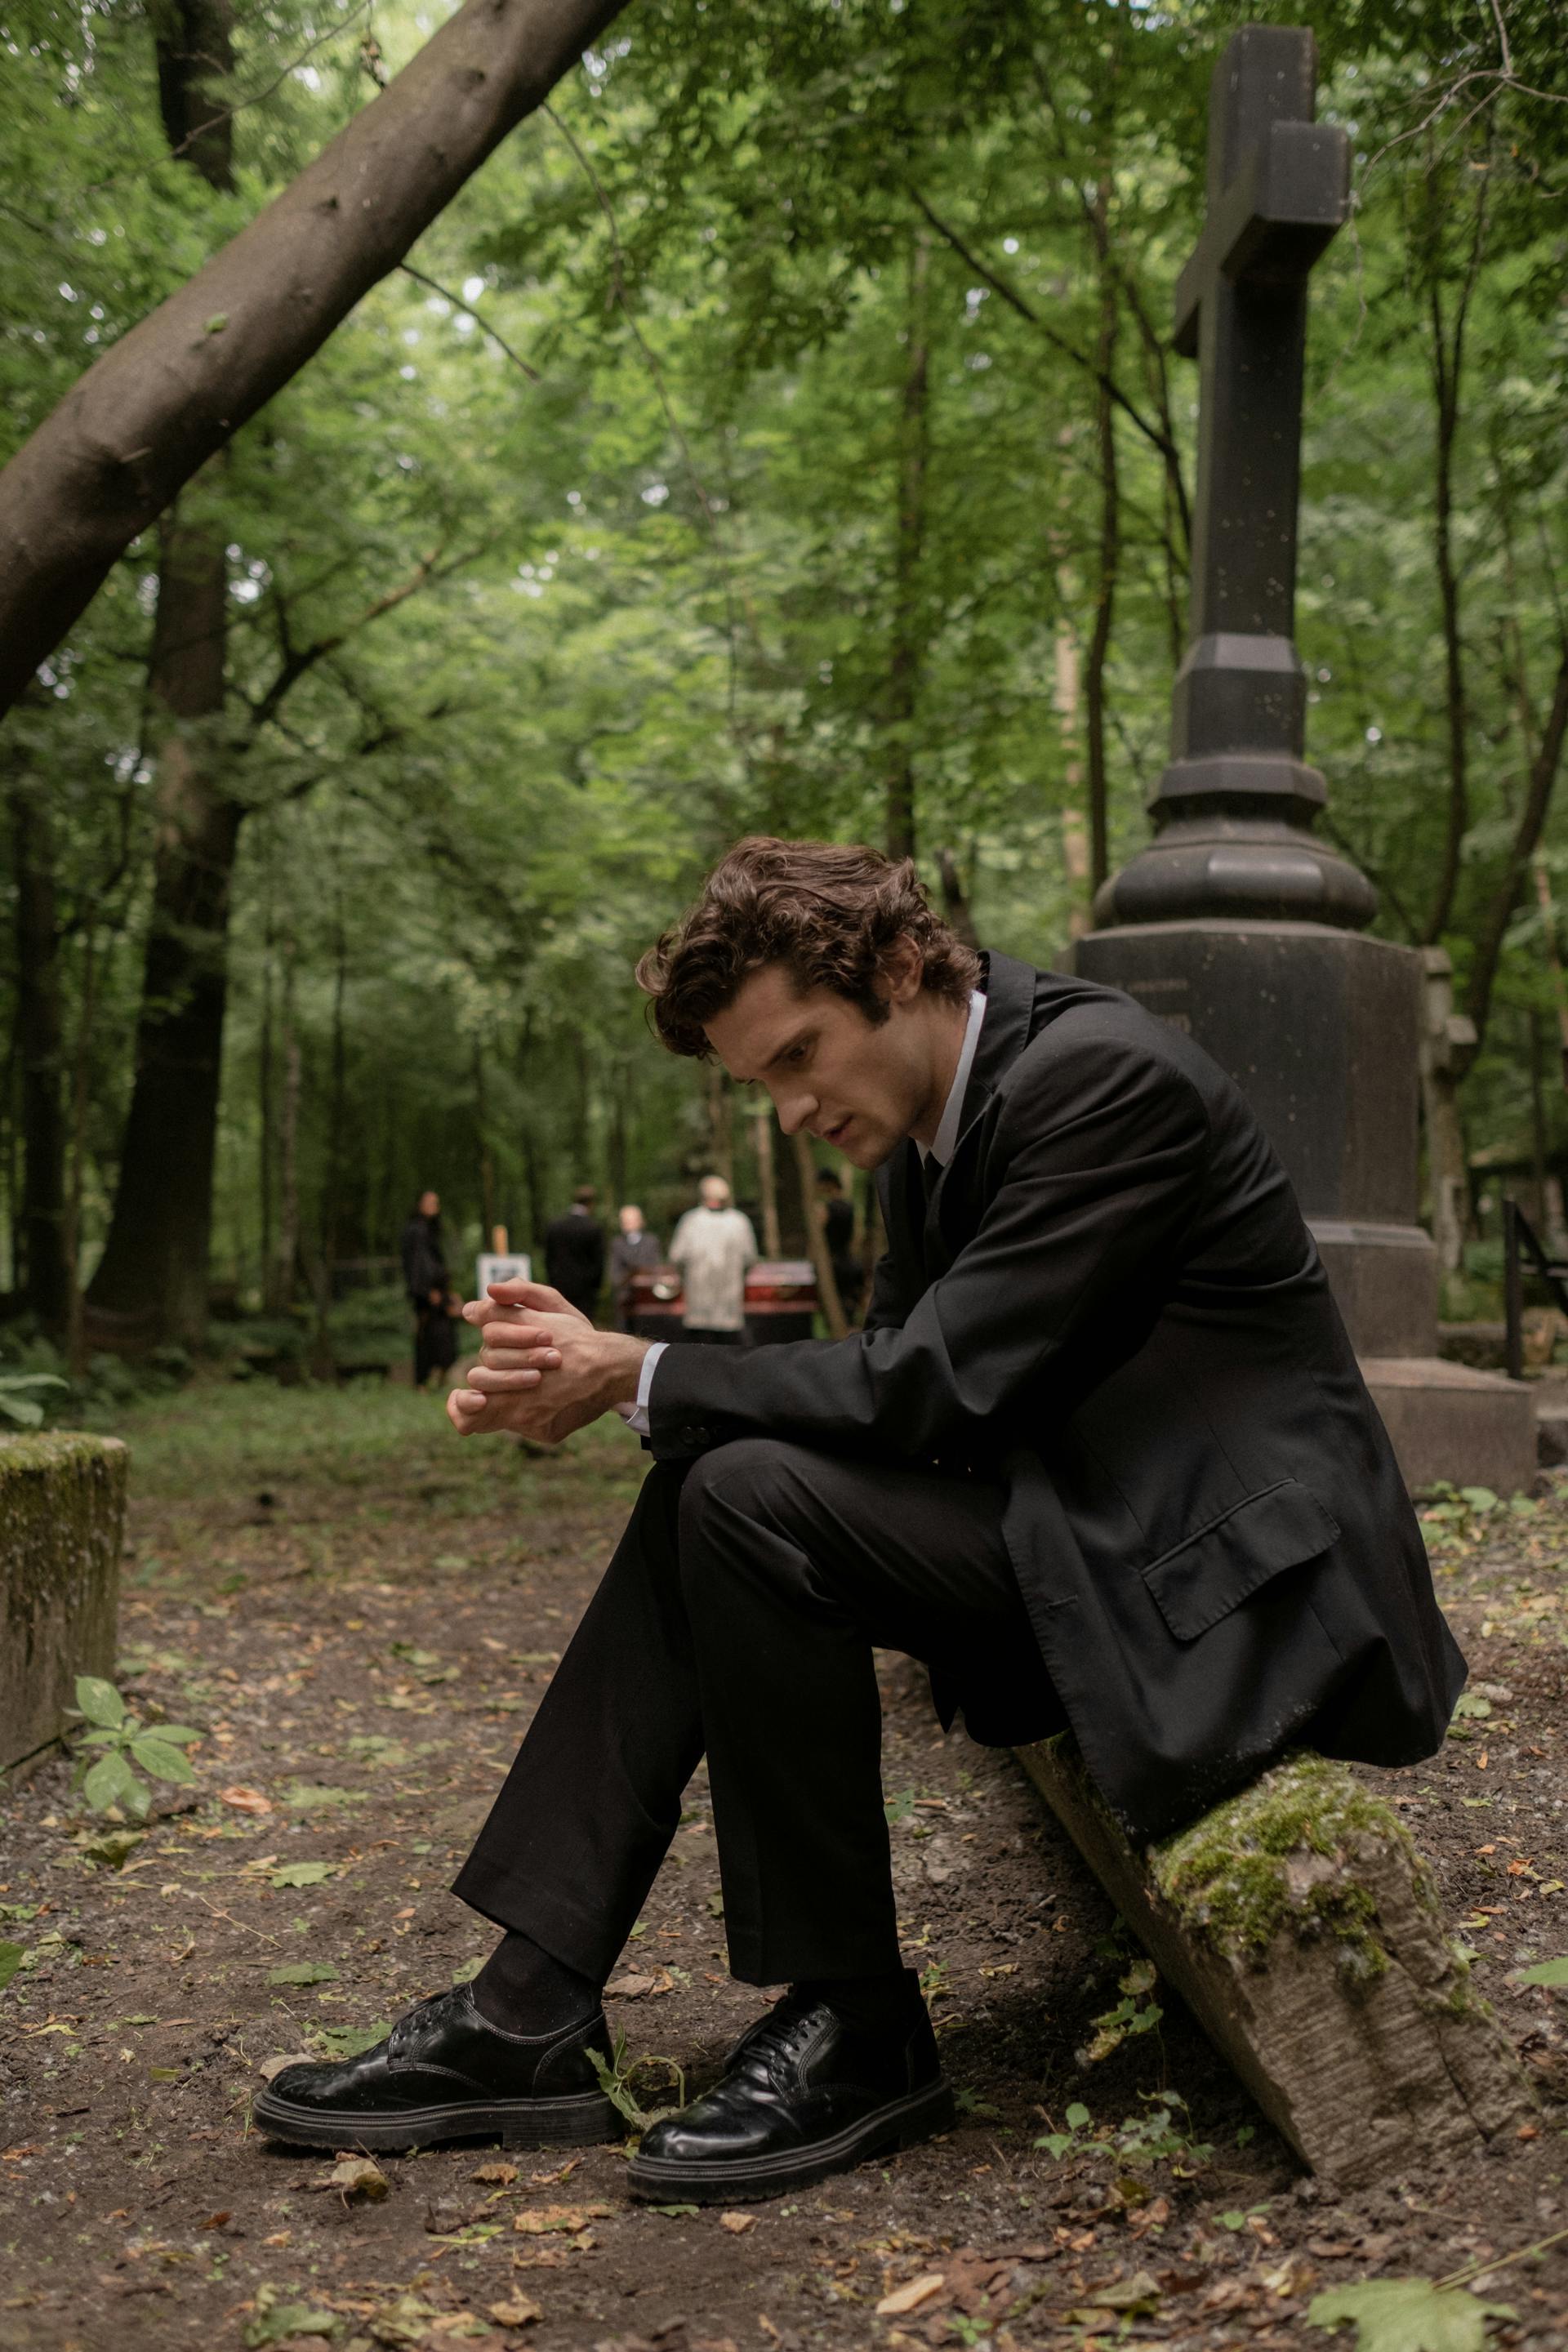 A man in a black suit and jacket sitting in a cemetery | Source: Pexels